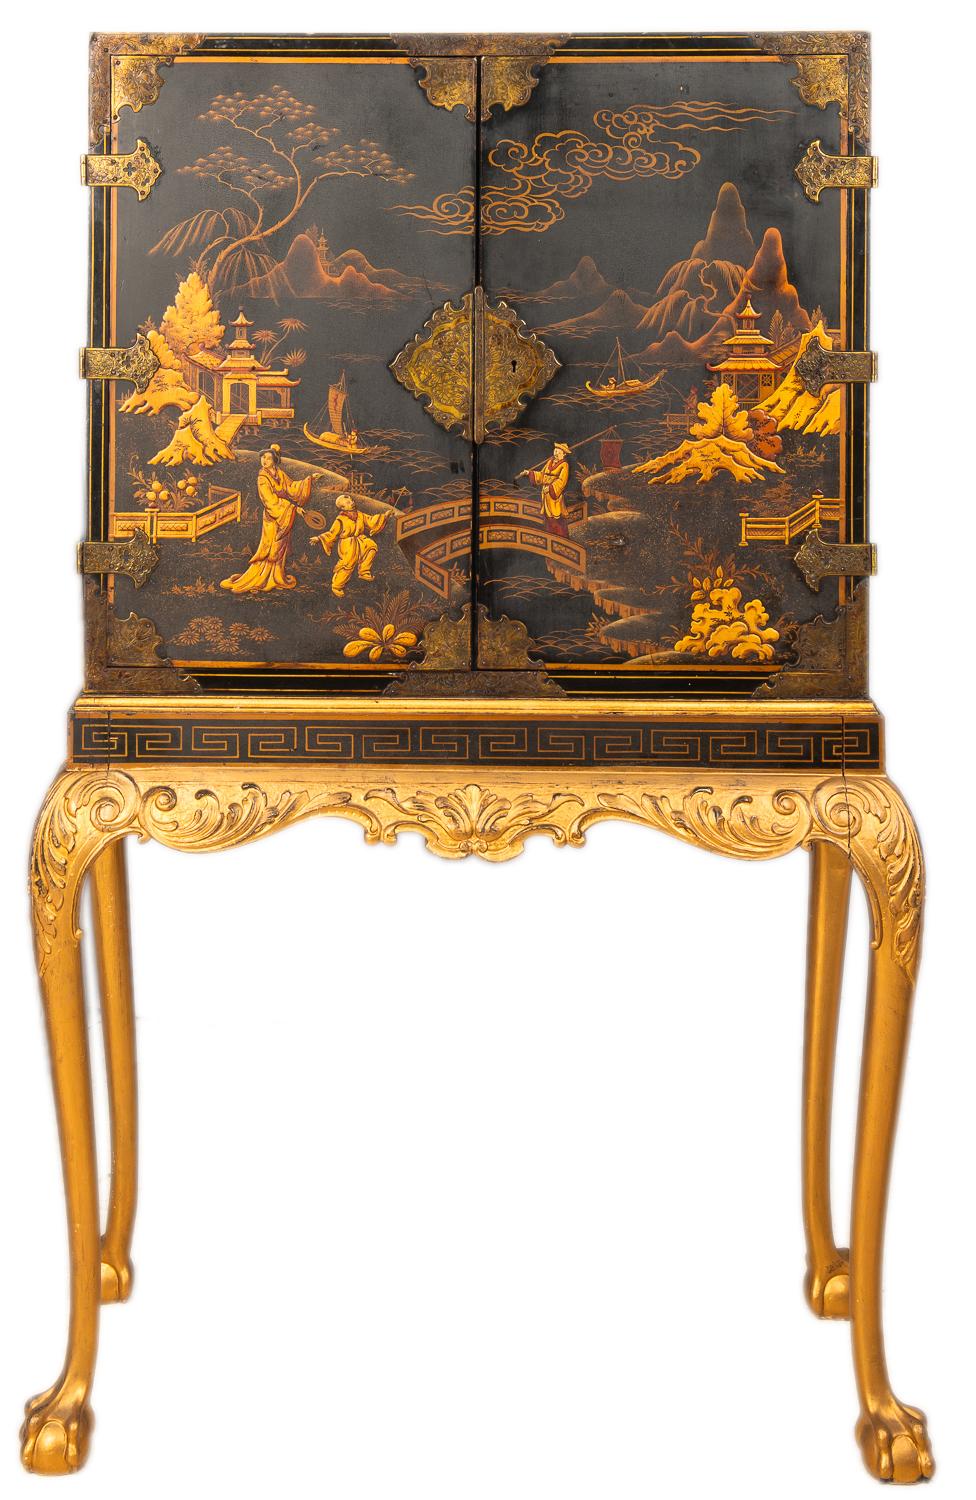 A good quality late 19th century Queen Ann style lacquer cabinet on stand. Have chinosiere
Lacquer decoration with oriental scenes to the two doors, opening to reveal a fitted interior of various drawers, raised on a carved gilded base with ball